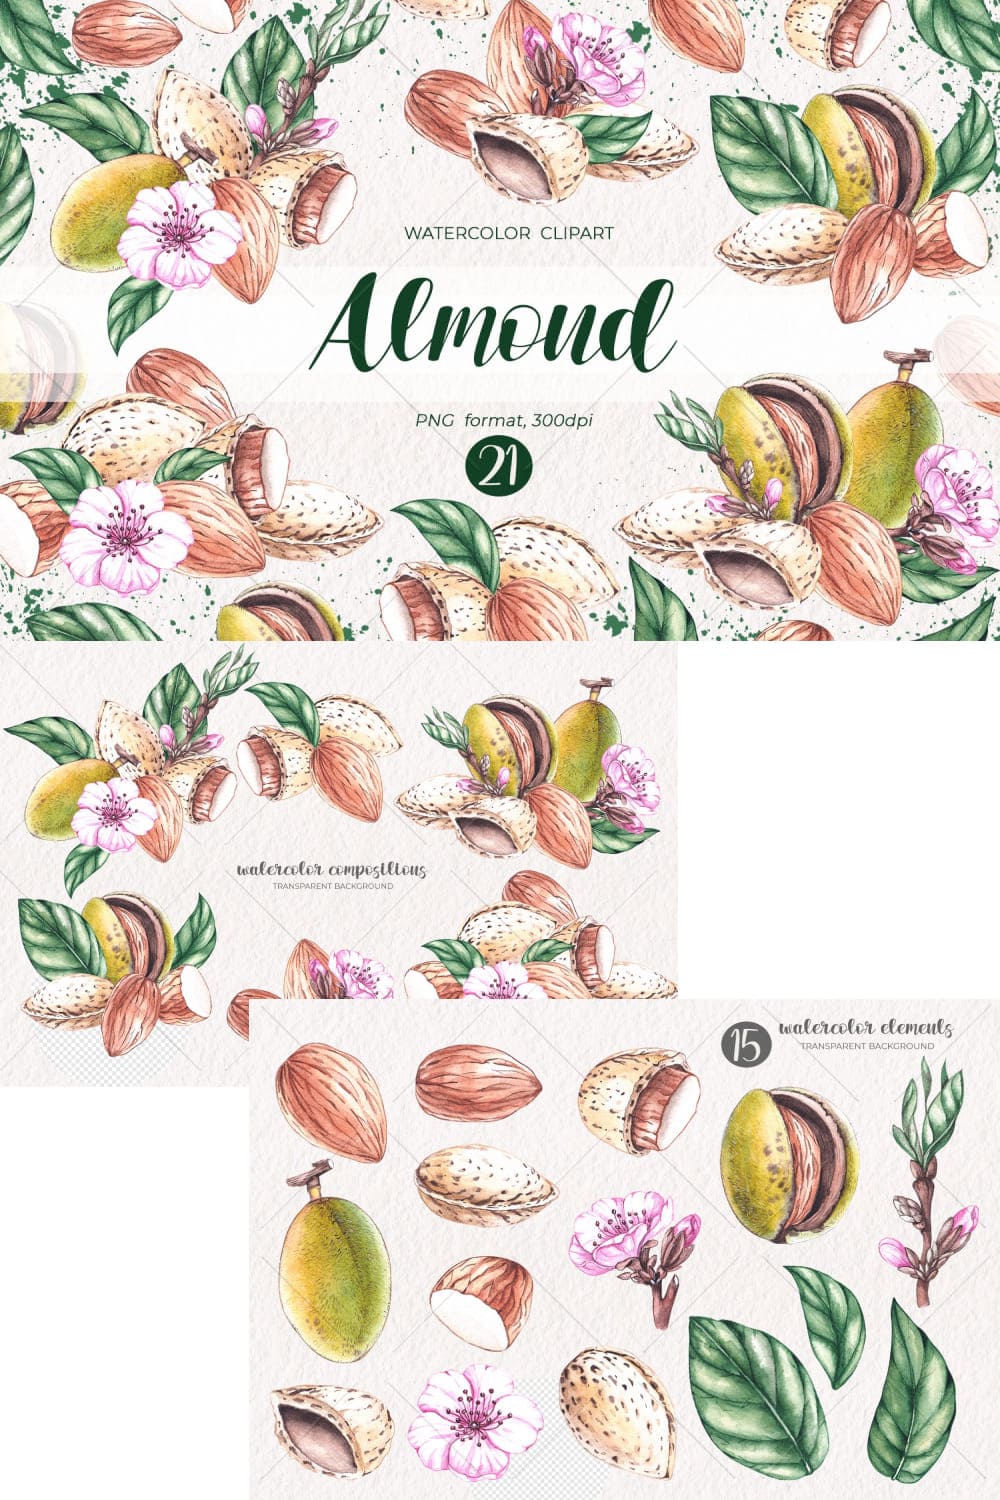 Watercolor almond, watercolor clipart PNG, picture for Pinterest 1000x1500.